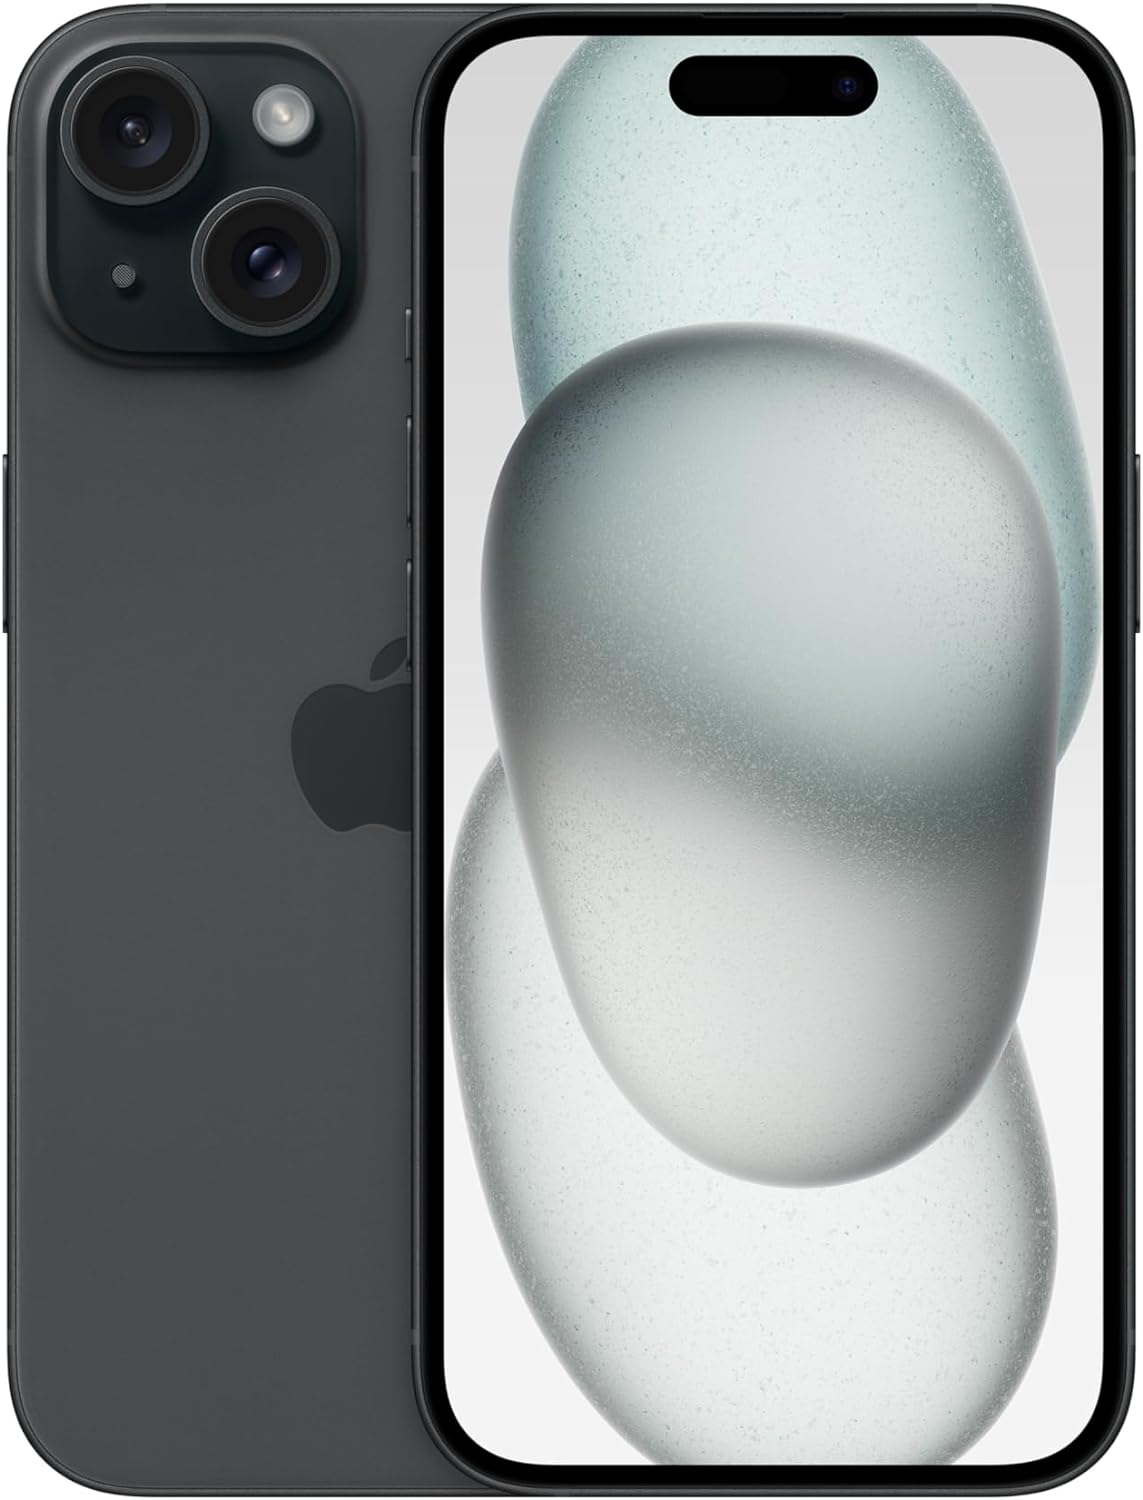 Apple iPhone 15 (512 GB) - Black: Dynamic Island alerts and Live Activities keep you connected on the go. 0195949037702